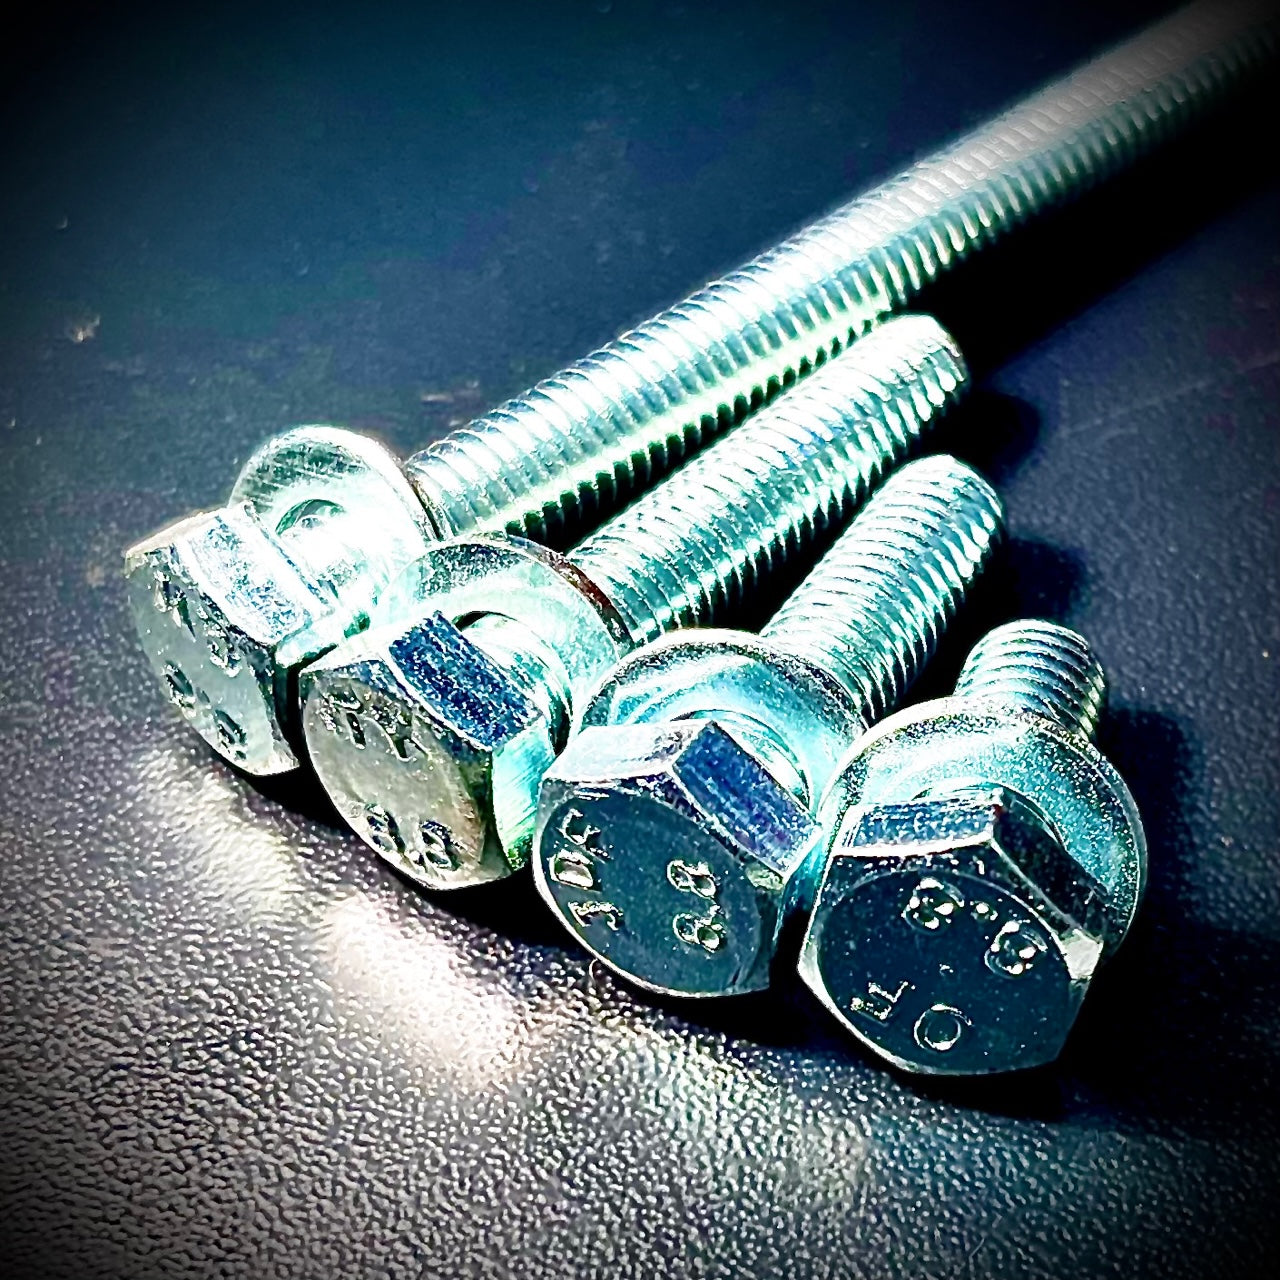 M20 Hex Set Screw plus Washer HT 8.8 Zinc DIN933 - Fixaball Ltd. Fixings and Fasteners UK